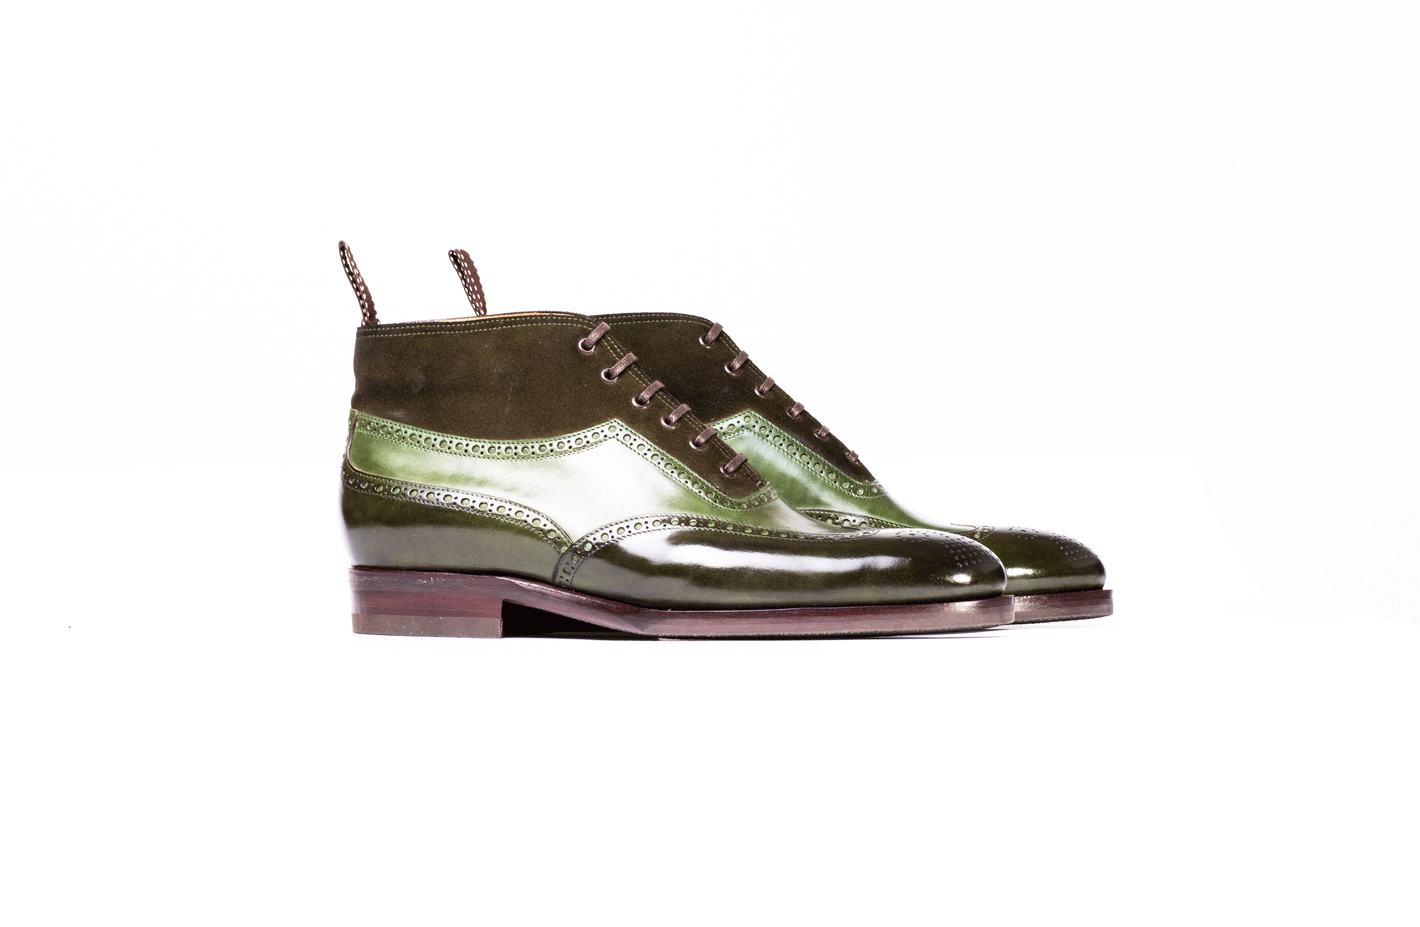 Oxford bootee with brogueing